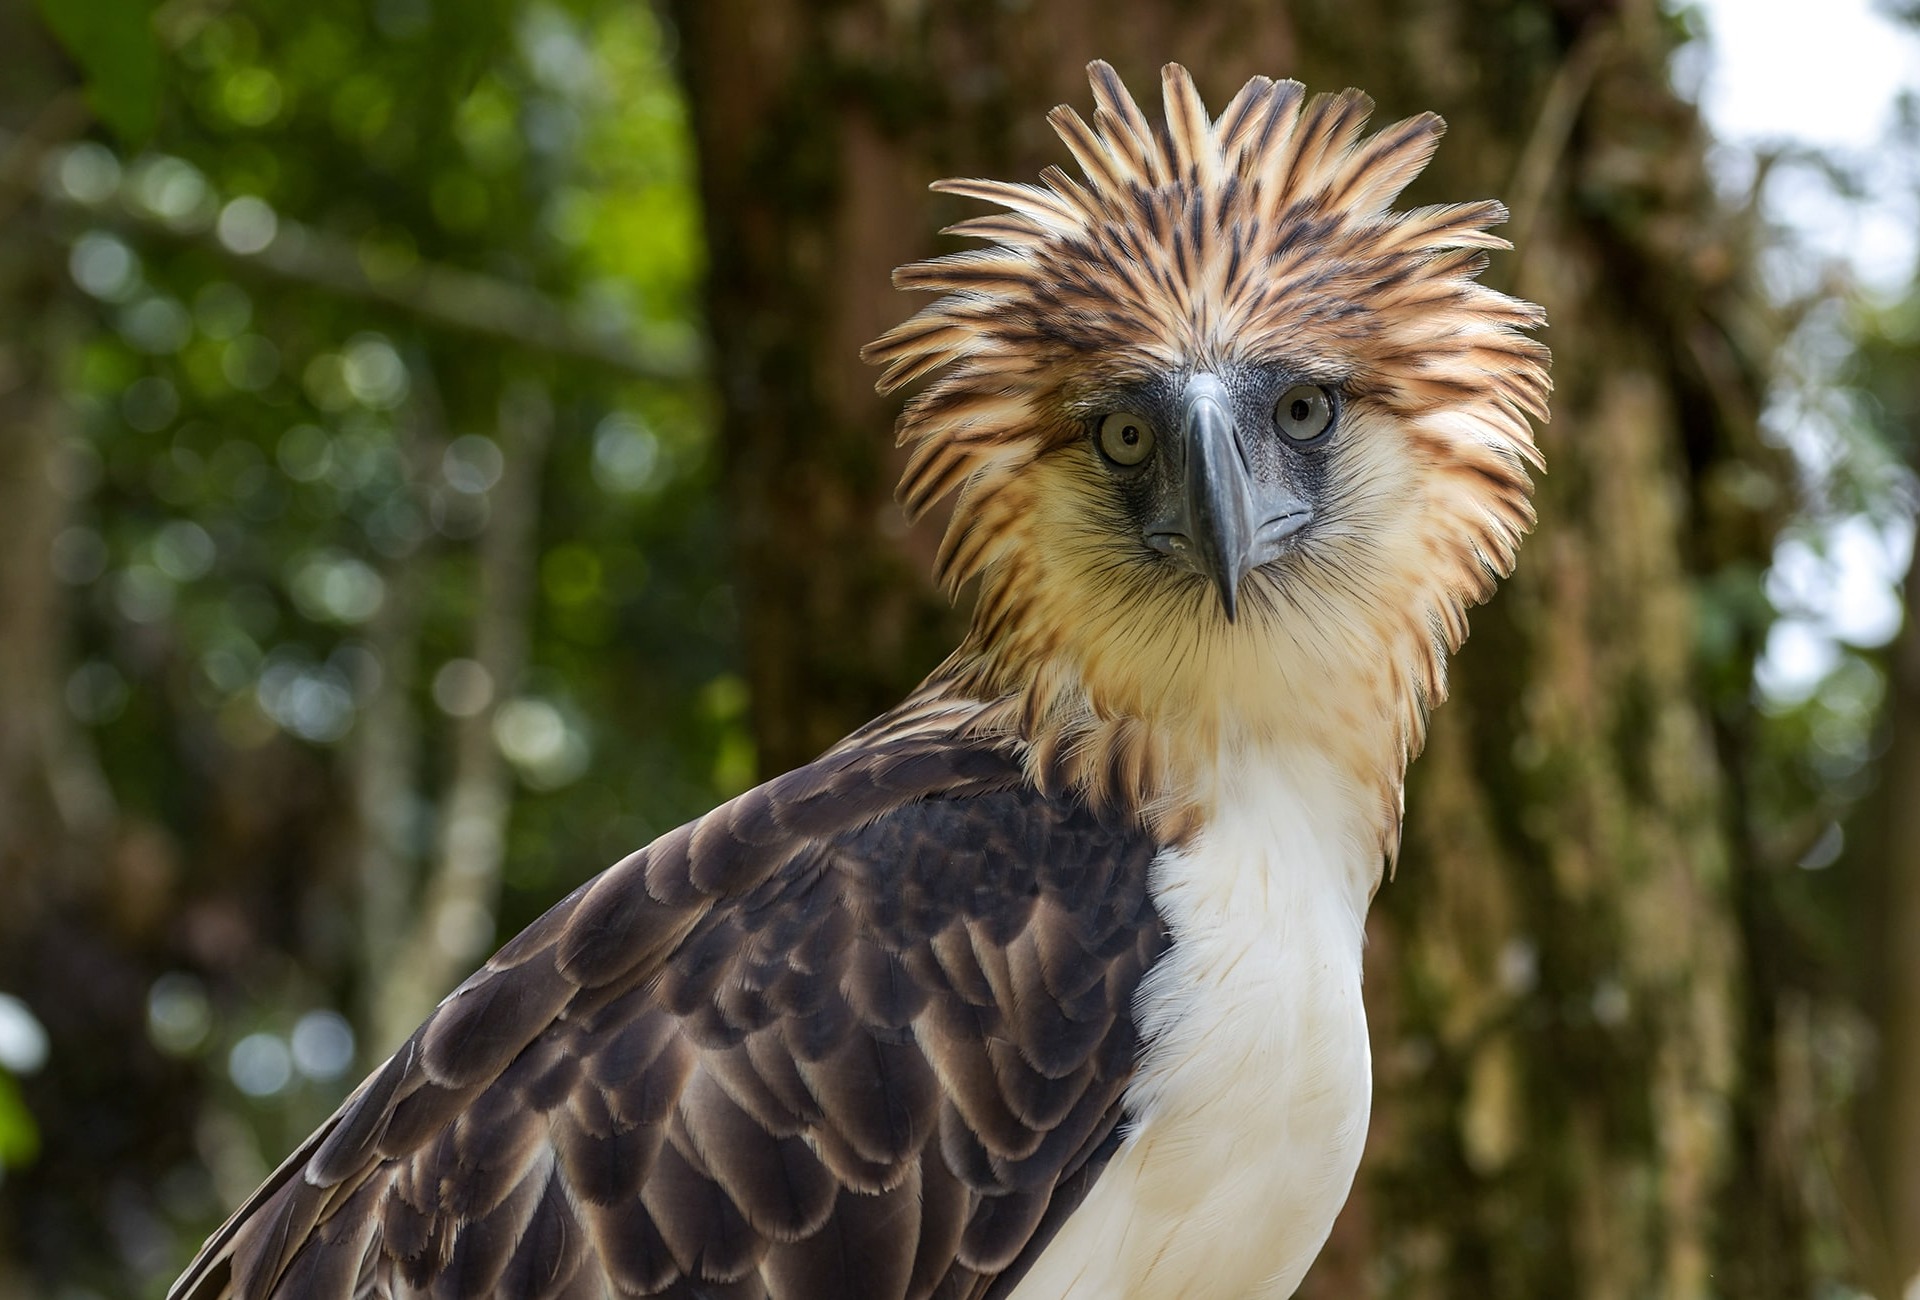 The Philippine Eagle, by Michal Lukaszewicz